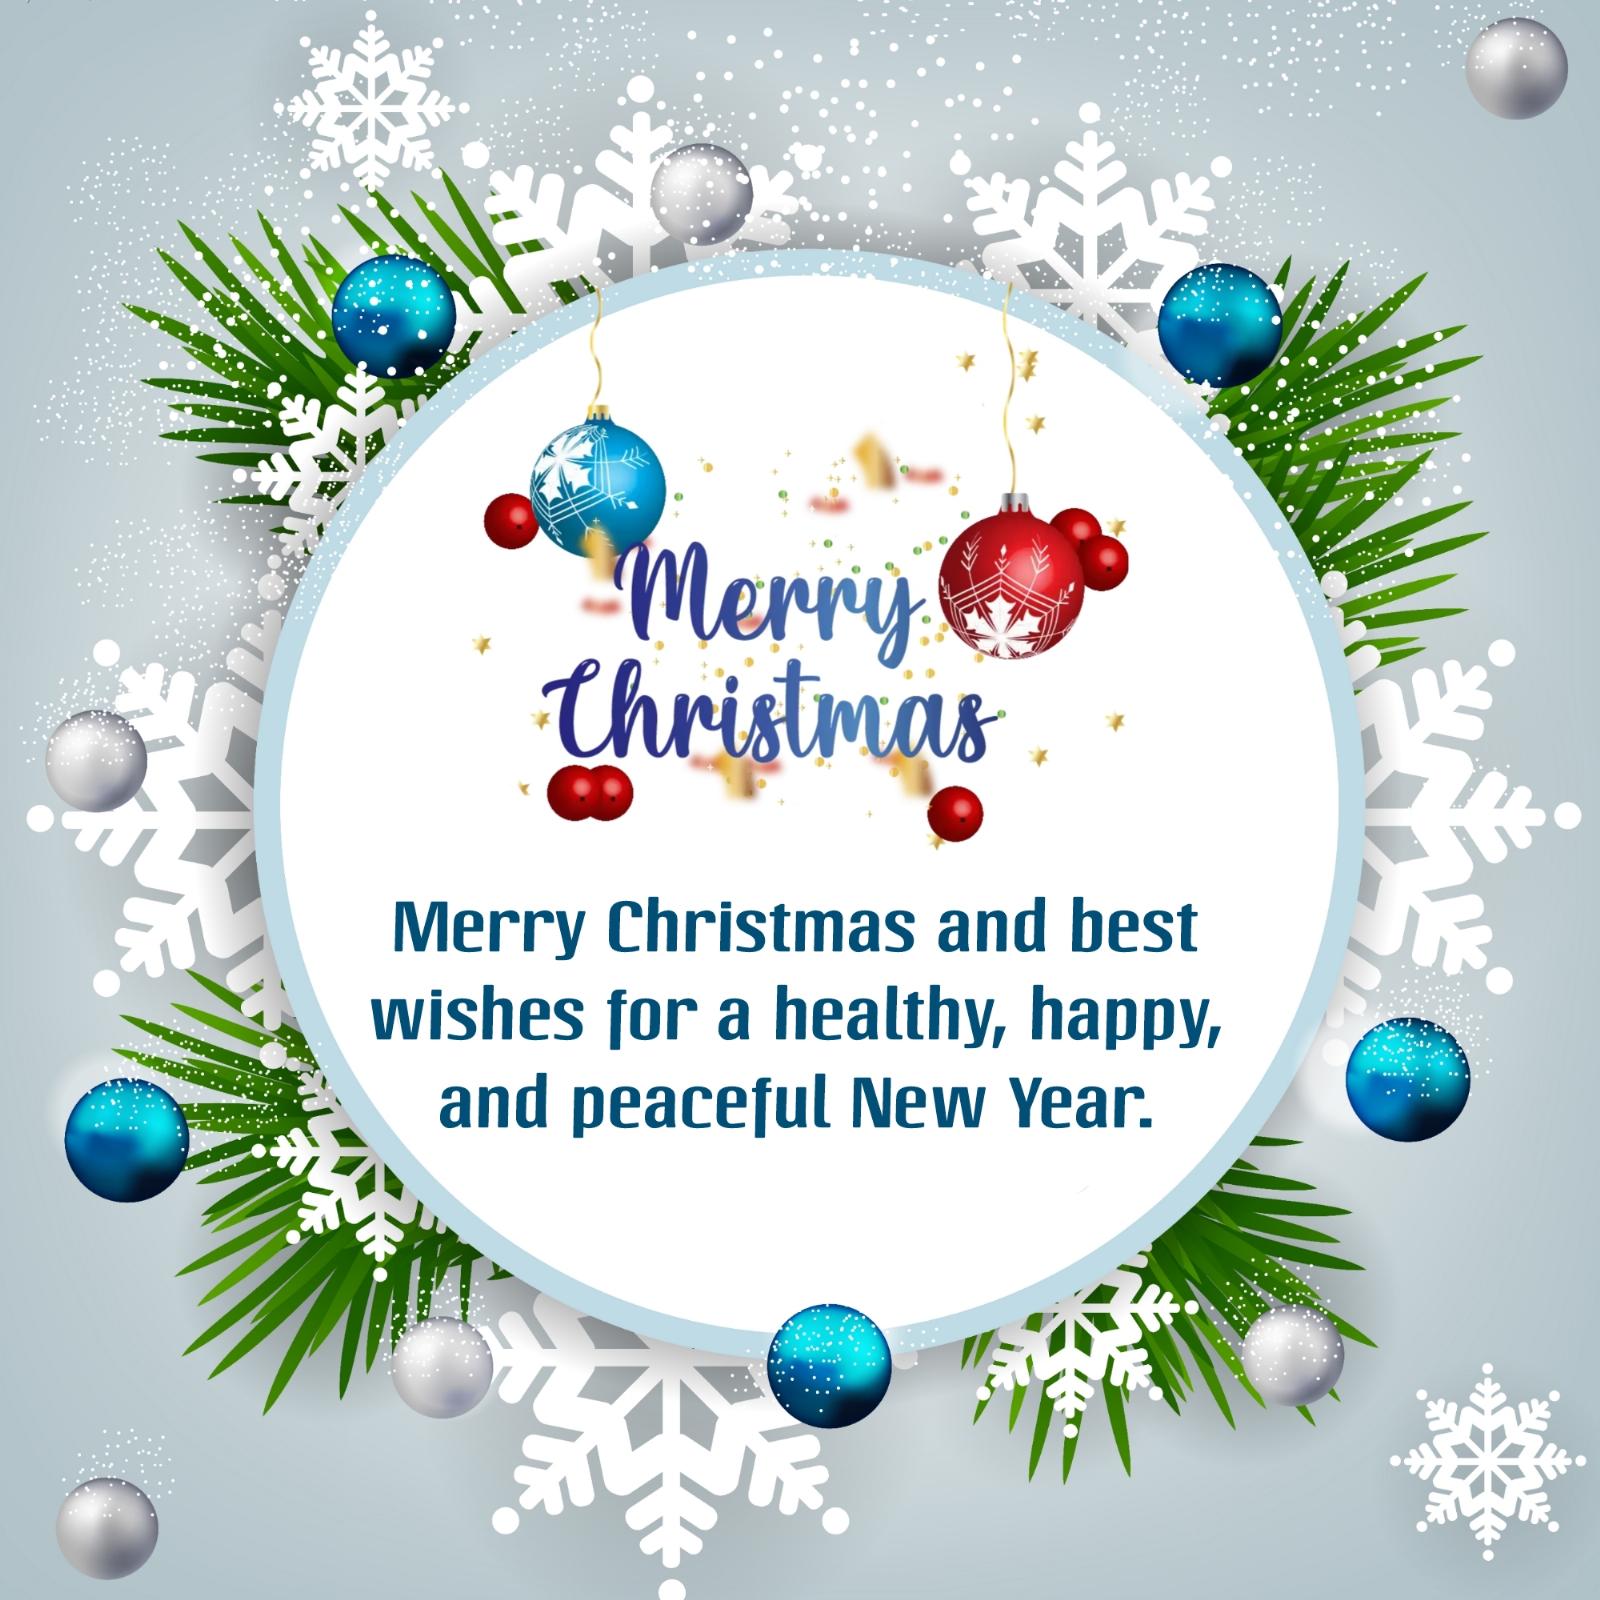 Merry Christmas and best wishes for a healthy happy